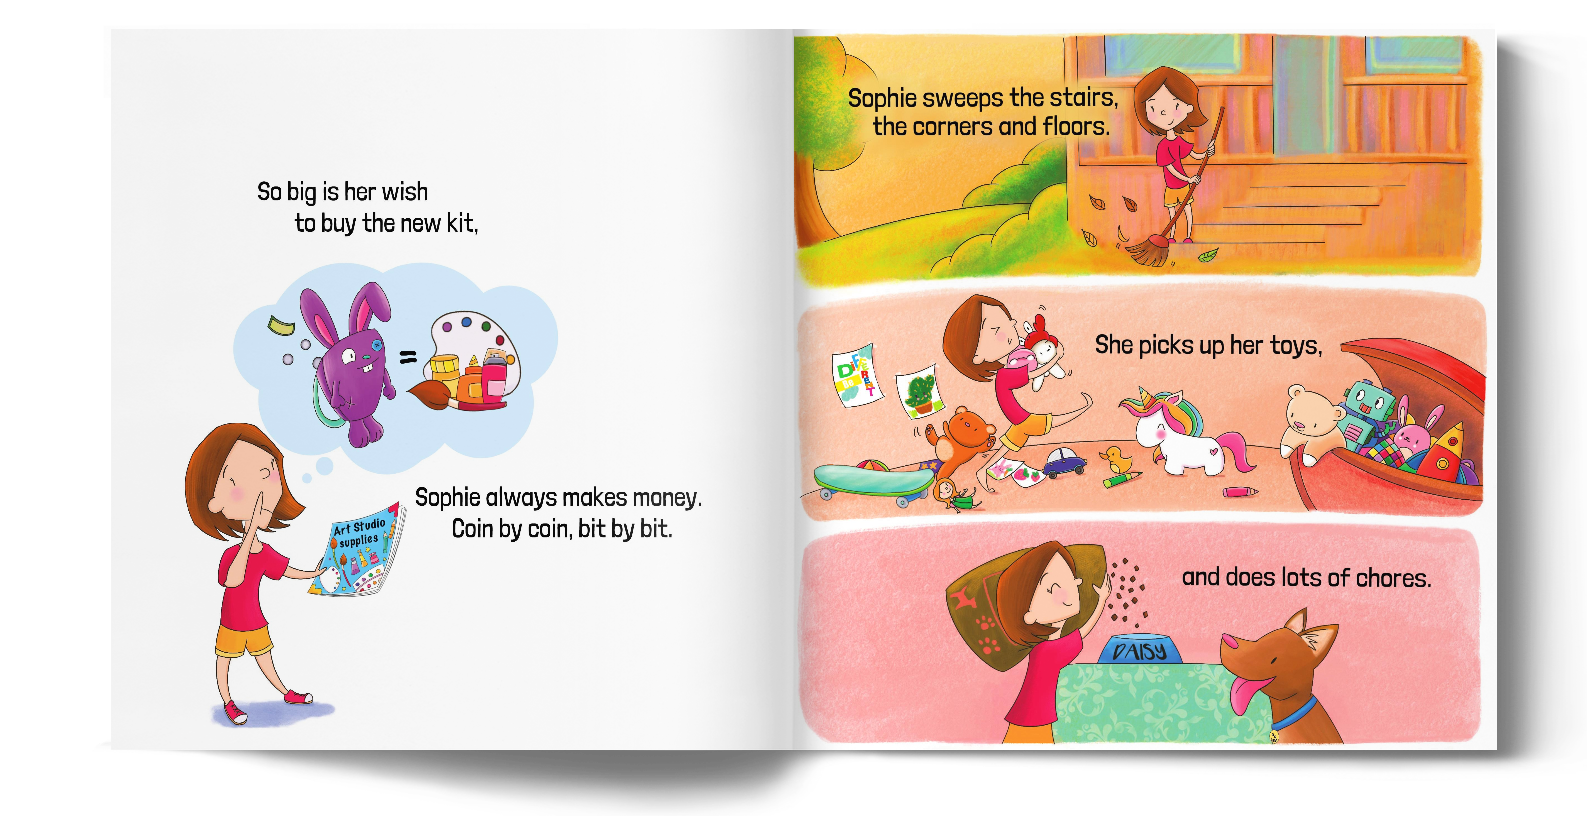 'So big is her wish to buy the new kit, Sophie always makes money. Coin by coin, bit by bit. Sophie sweeps the stairs, the corners, and floors. She picks up her toys and does lots of chores.' Left page, Sophie is holding an art studio supplies catalog and envisioning her new art kit. Right page, Sophie is sweeping, picking up toys, and feeding her dog Daisy.